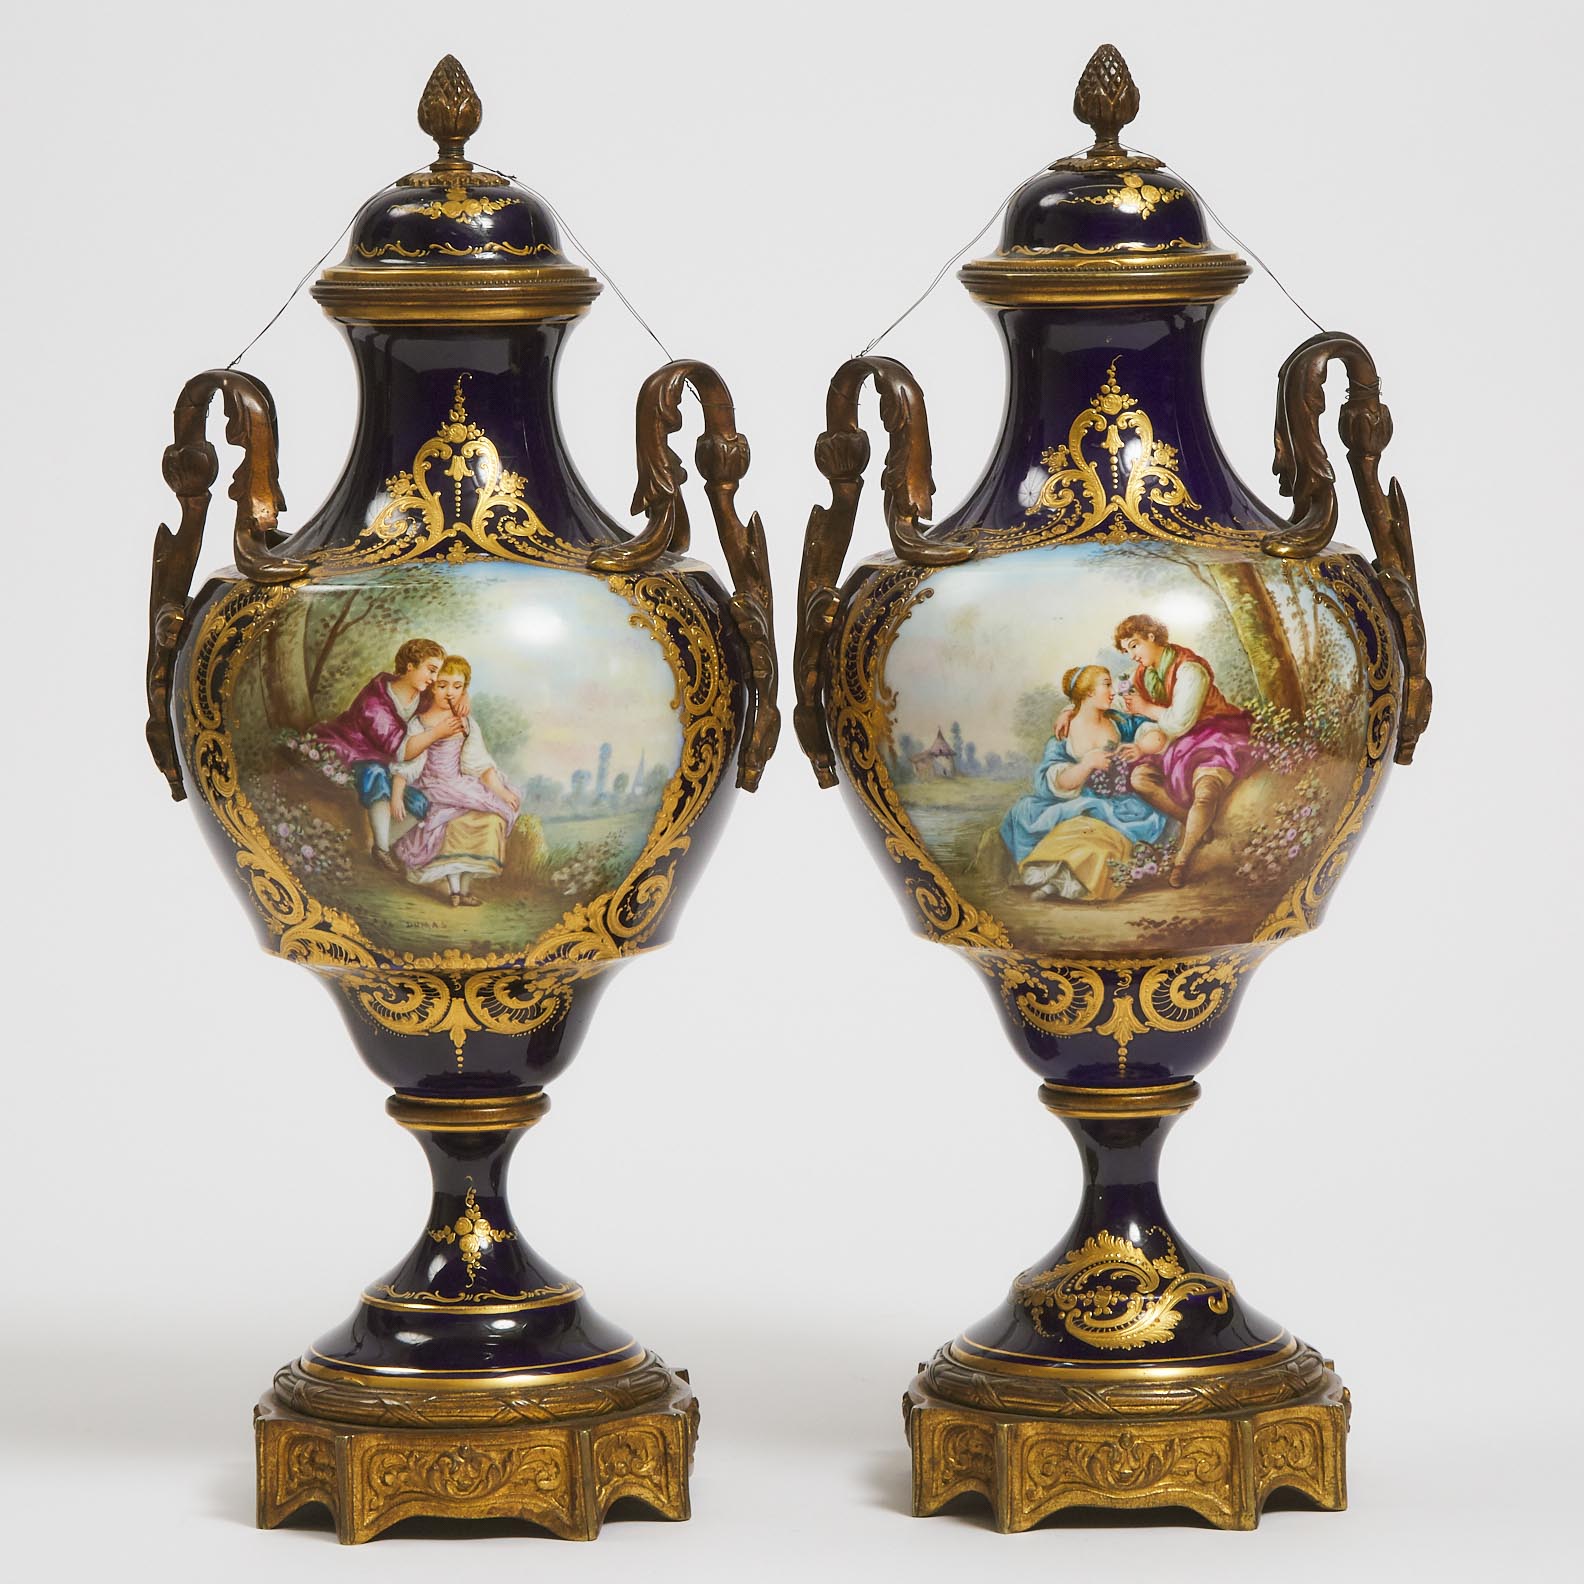 Pair of Gilt-Bronze Mounted 'Sèvres' Vases and Covers, c.1900